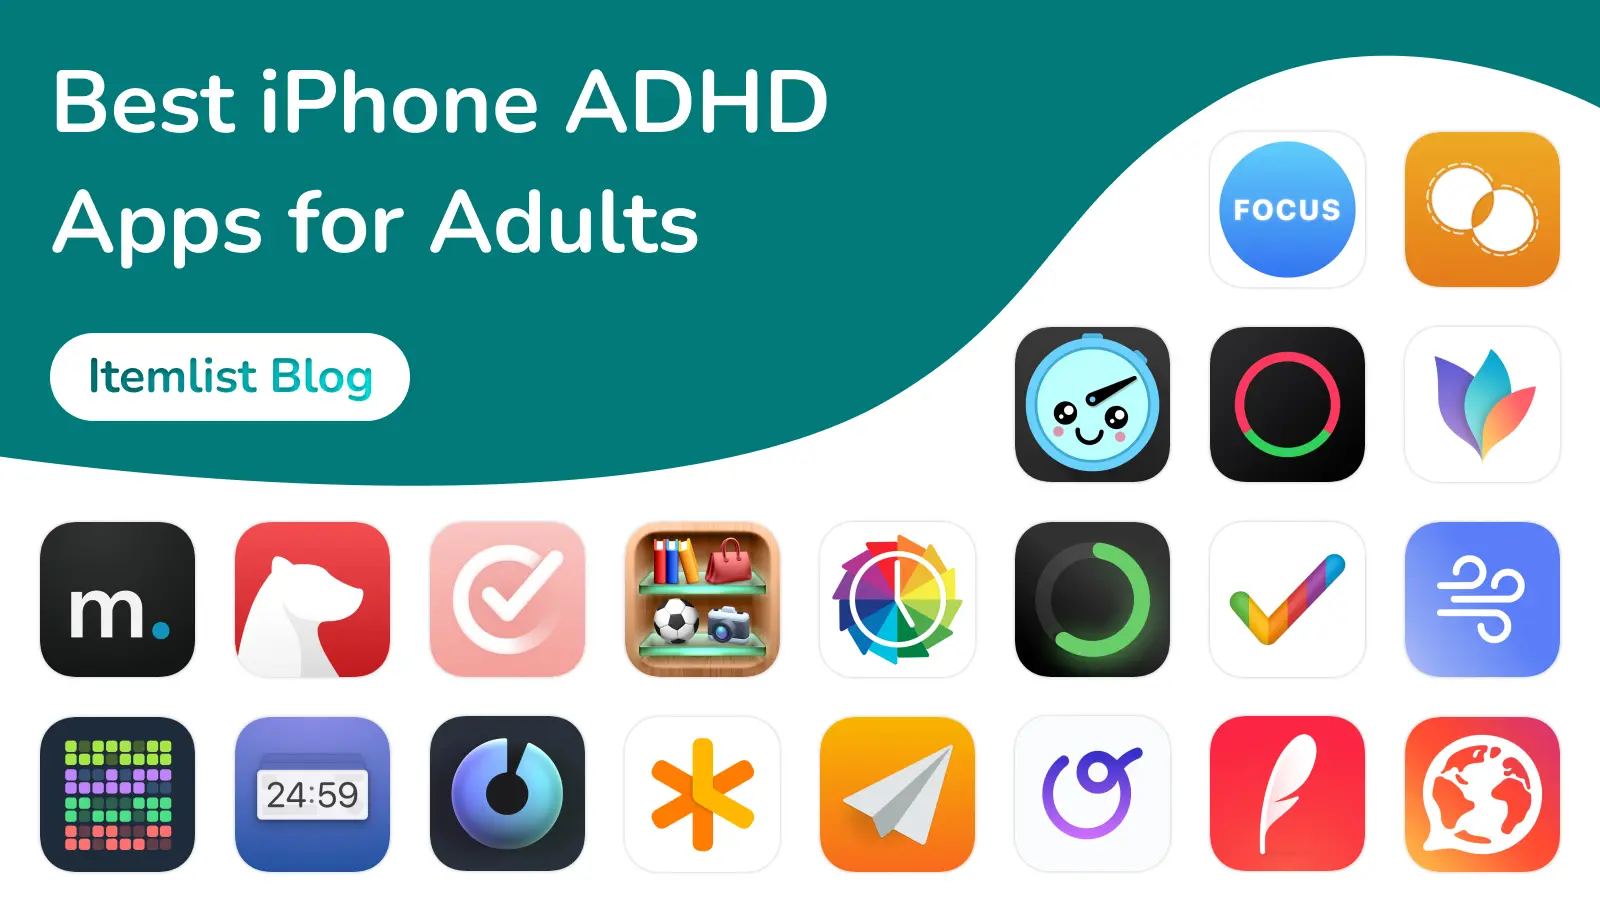 Best iPhone ADHD Apps for Adults (Ultimate Collection)